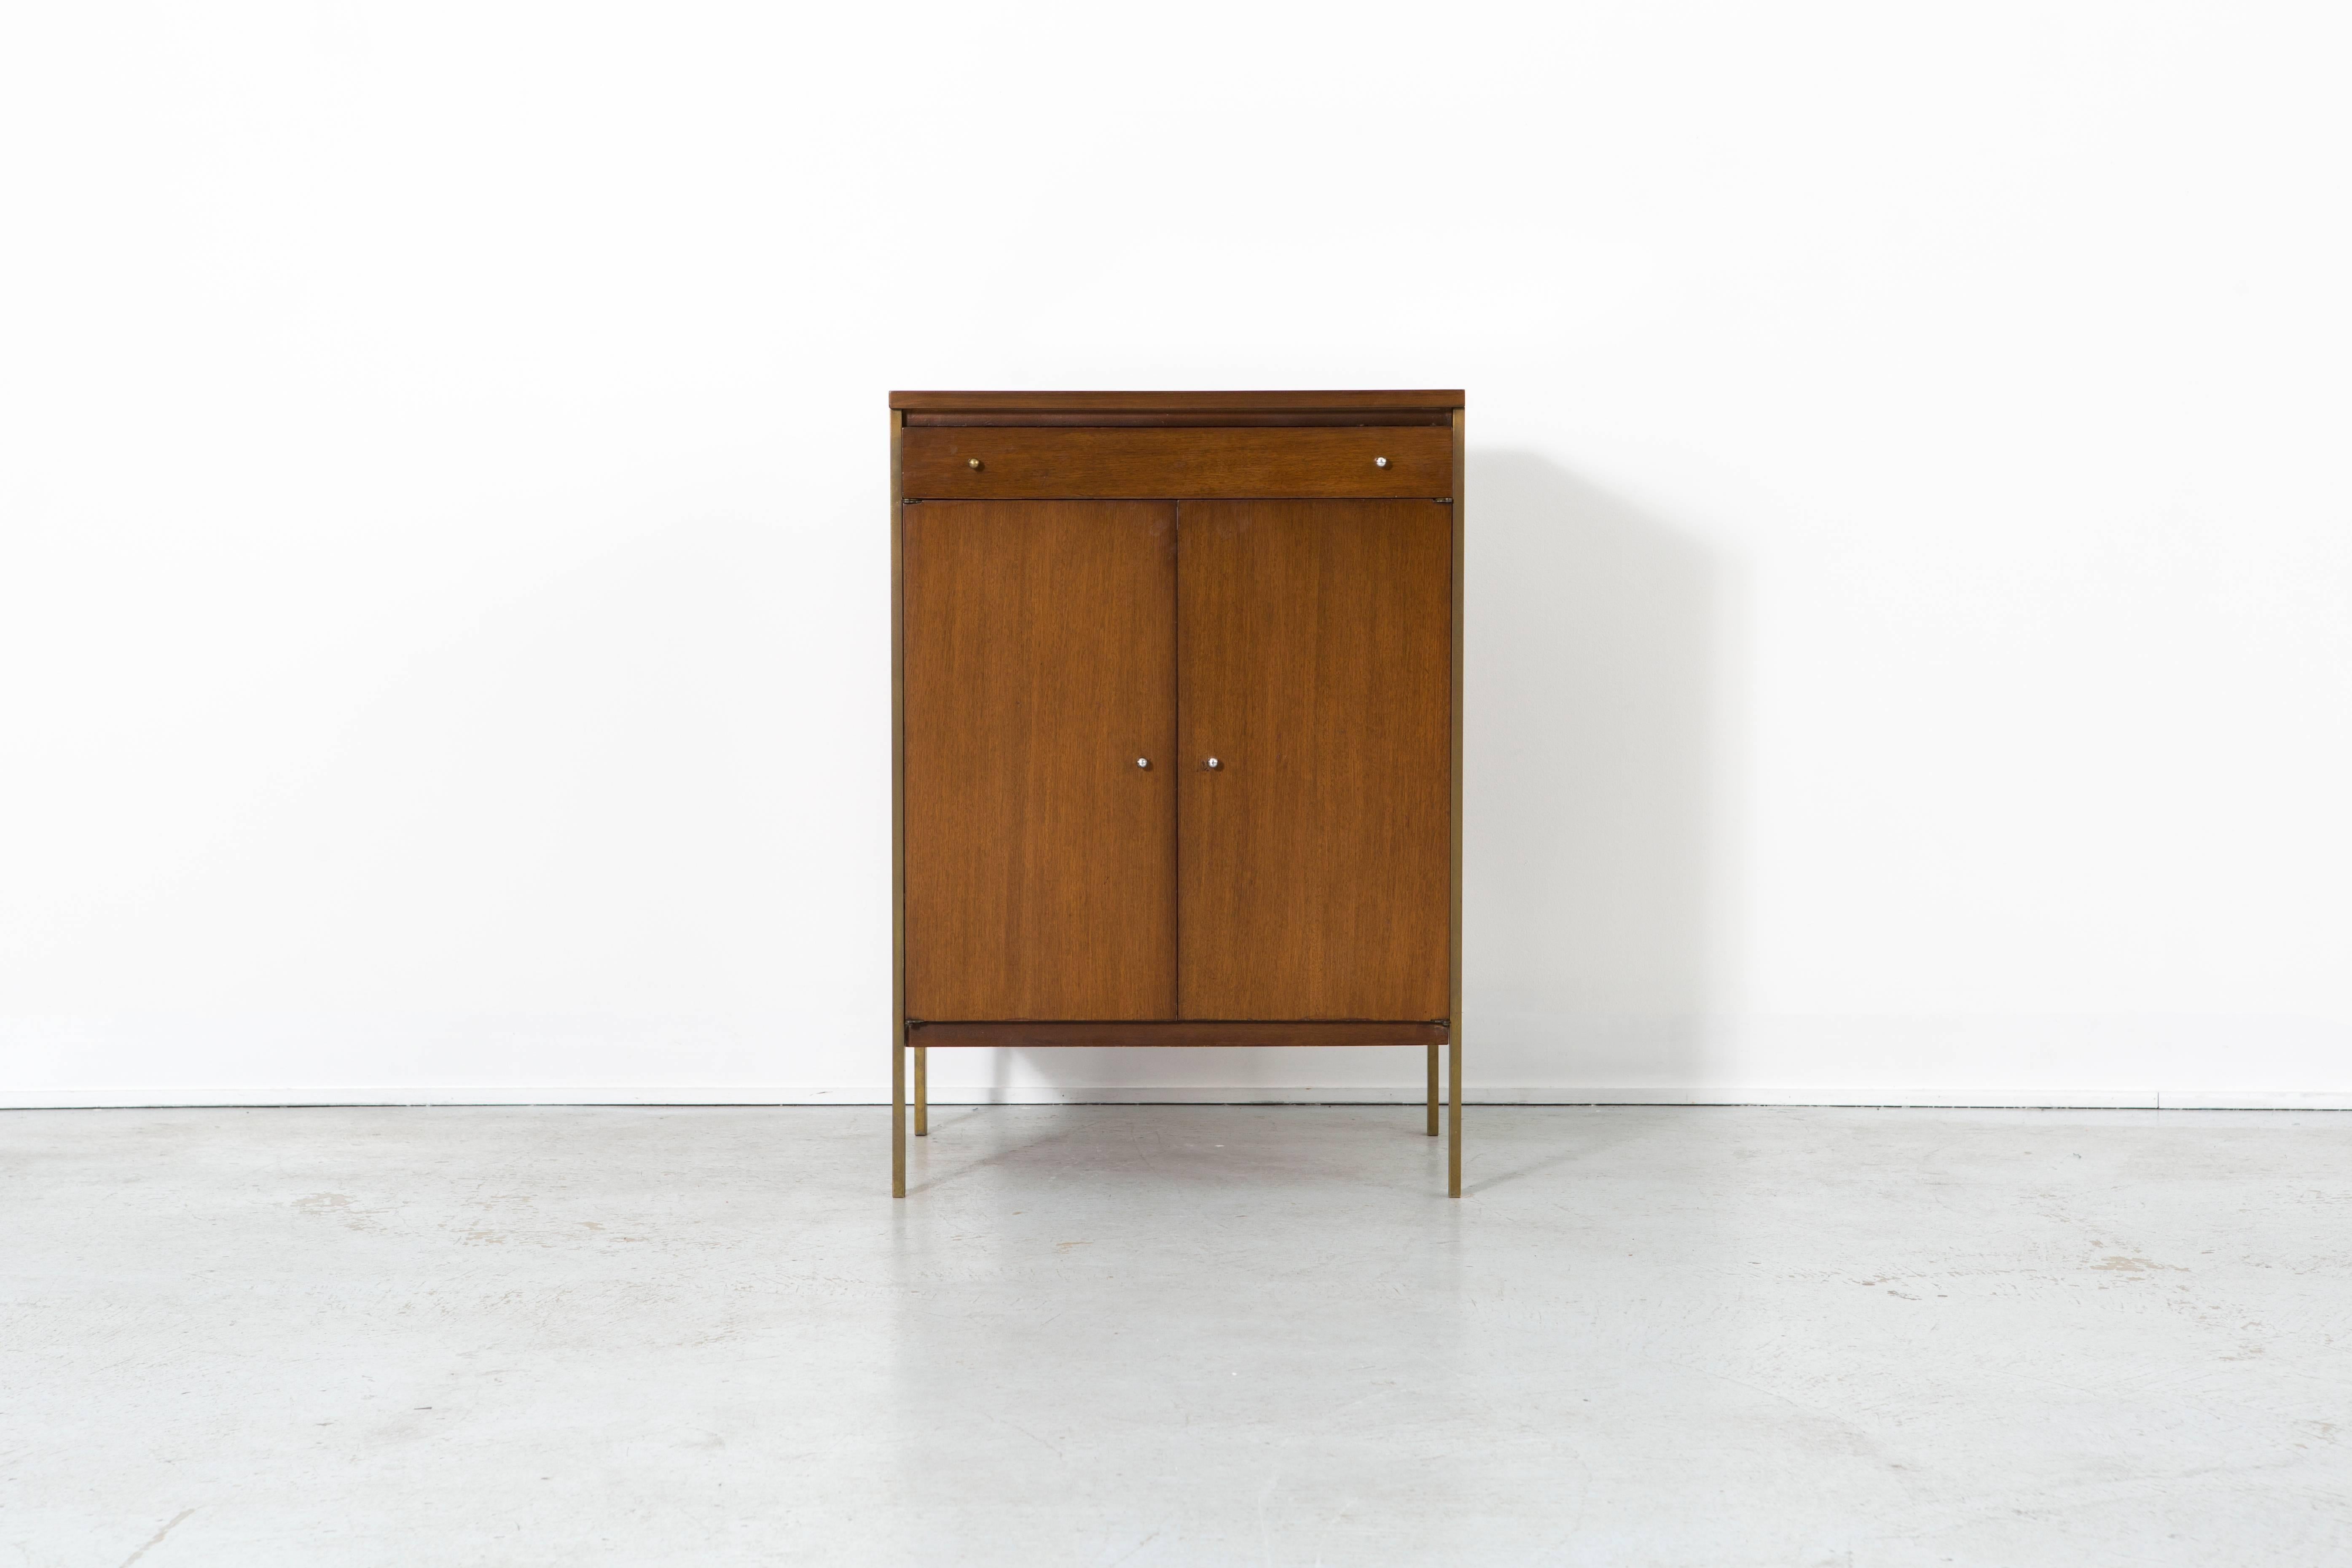 Paul McCobb magnetic-pull cabinet

Connoisseur collection by Paul McCobb

designed by Paul McCobb for H. Sacks + Sons Brookline Mass

USA, circa 1950s

walnut and brass

cabinet is pictured with Paul McCobb's eight-shelf cabinet which is